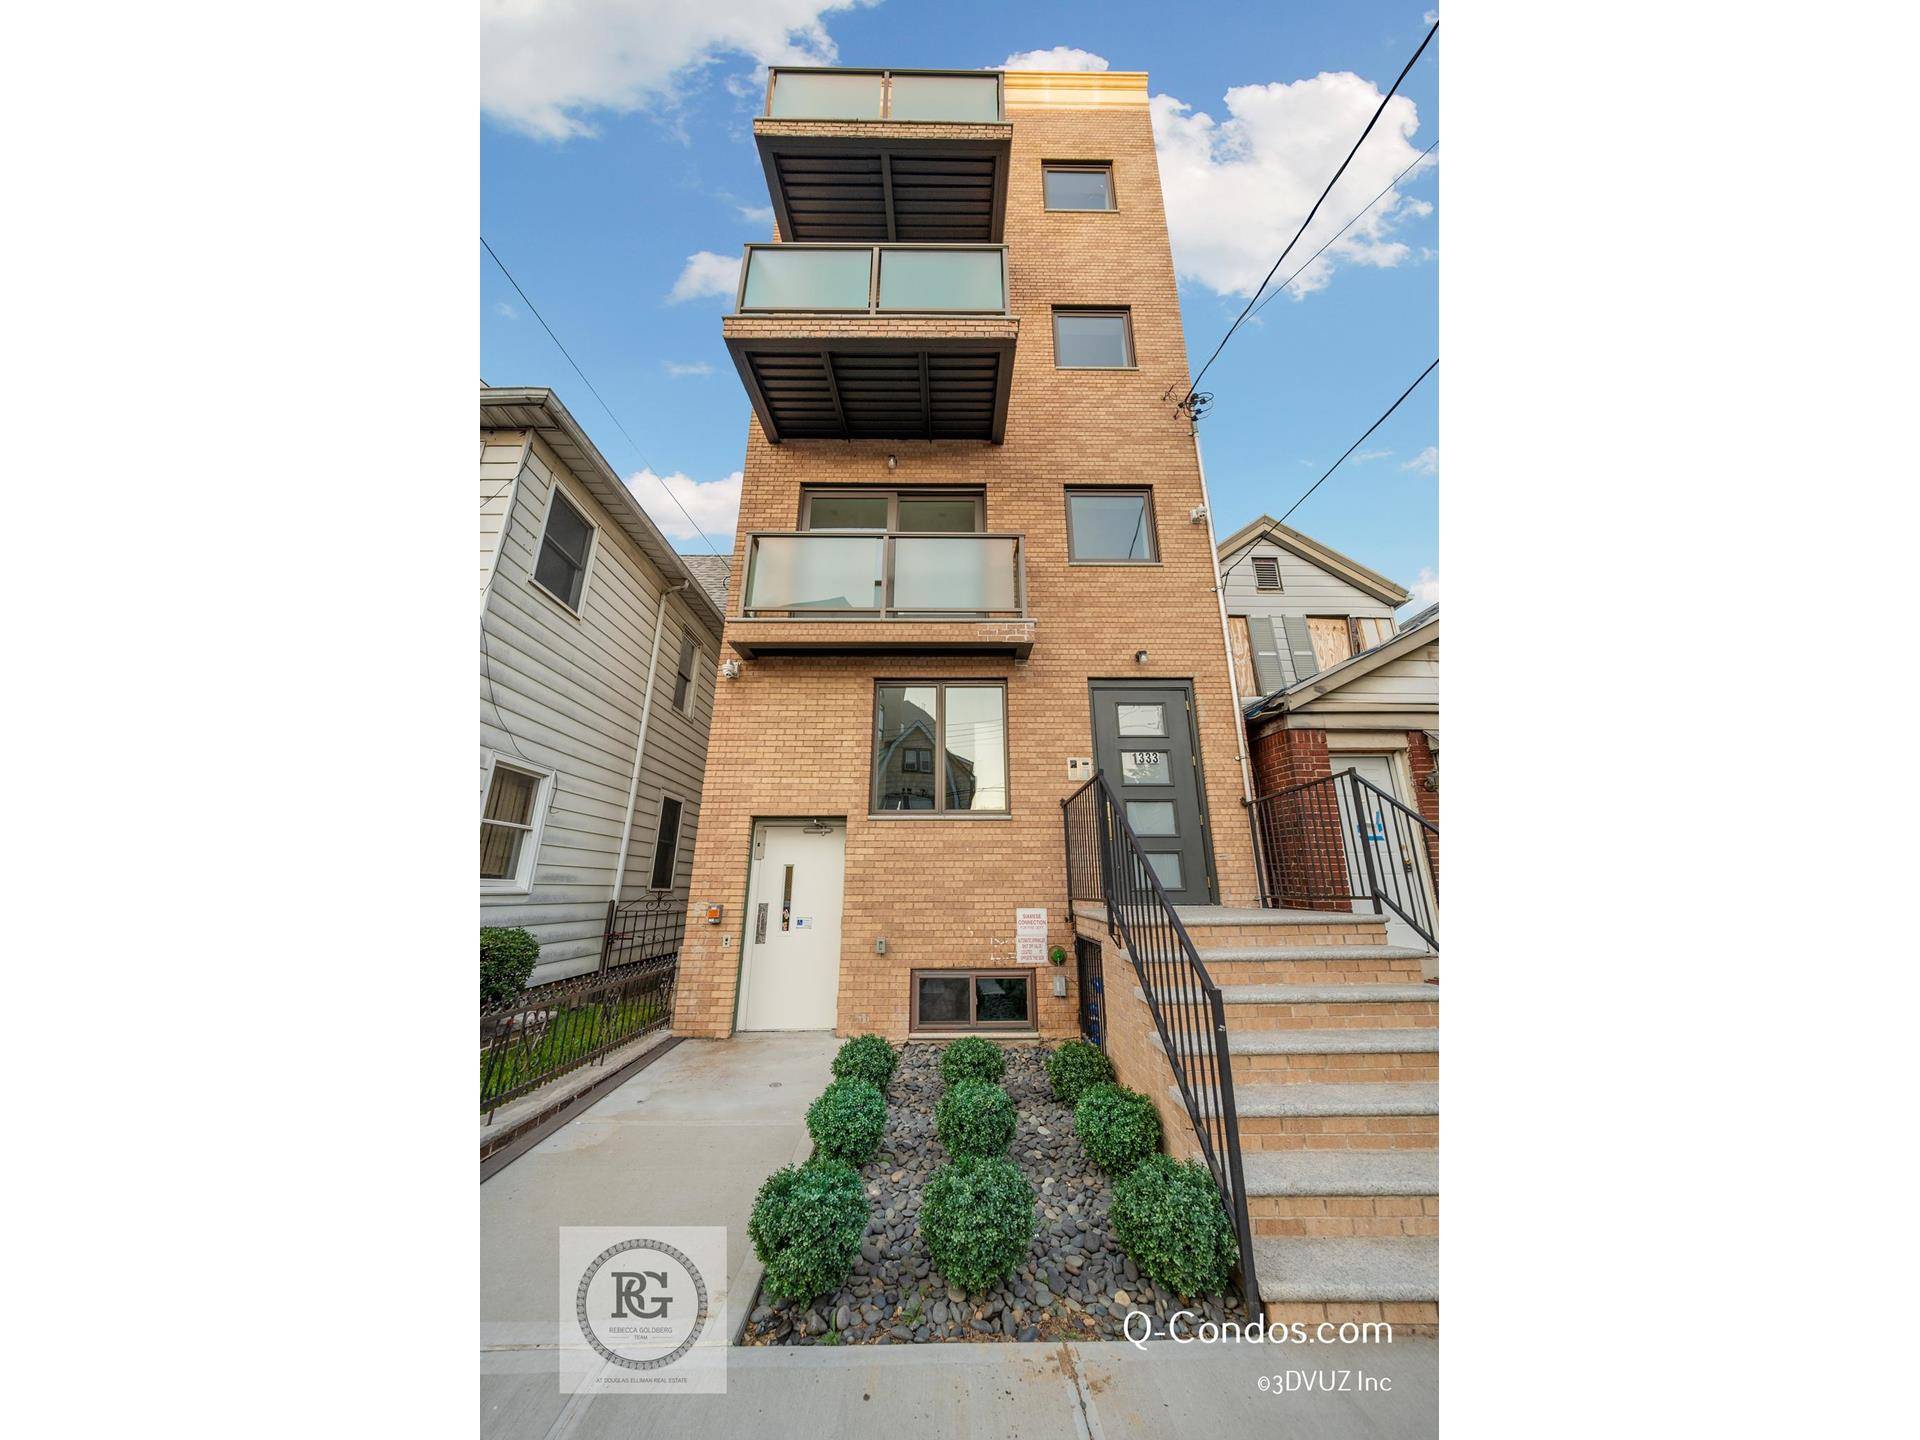 4 Family building right in the heart of Midwood.